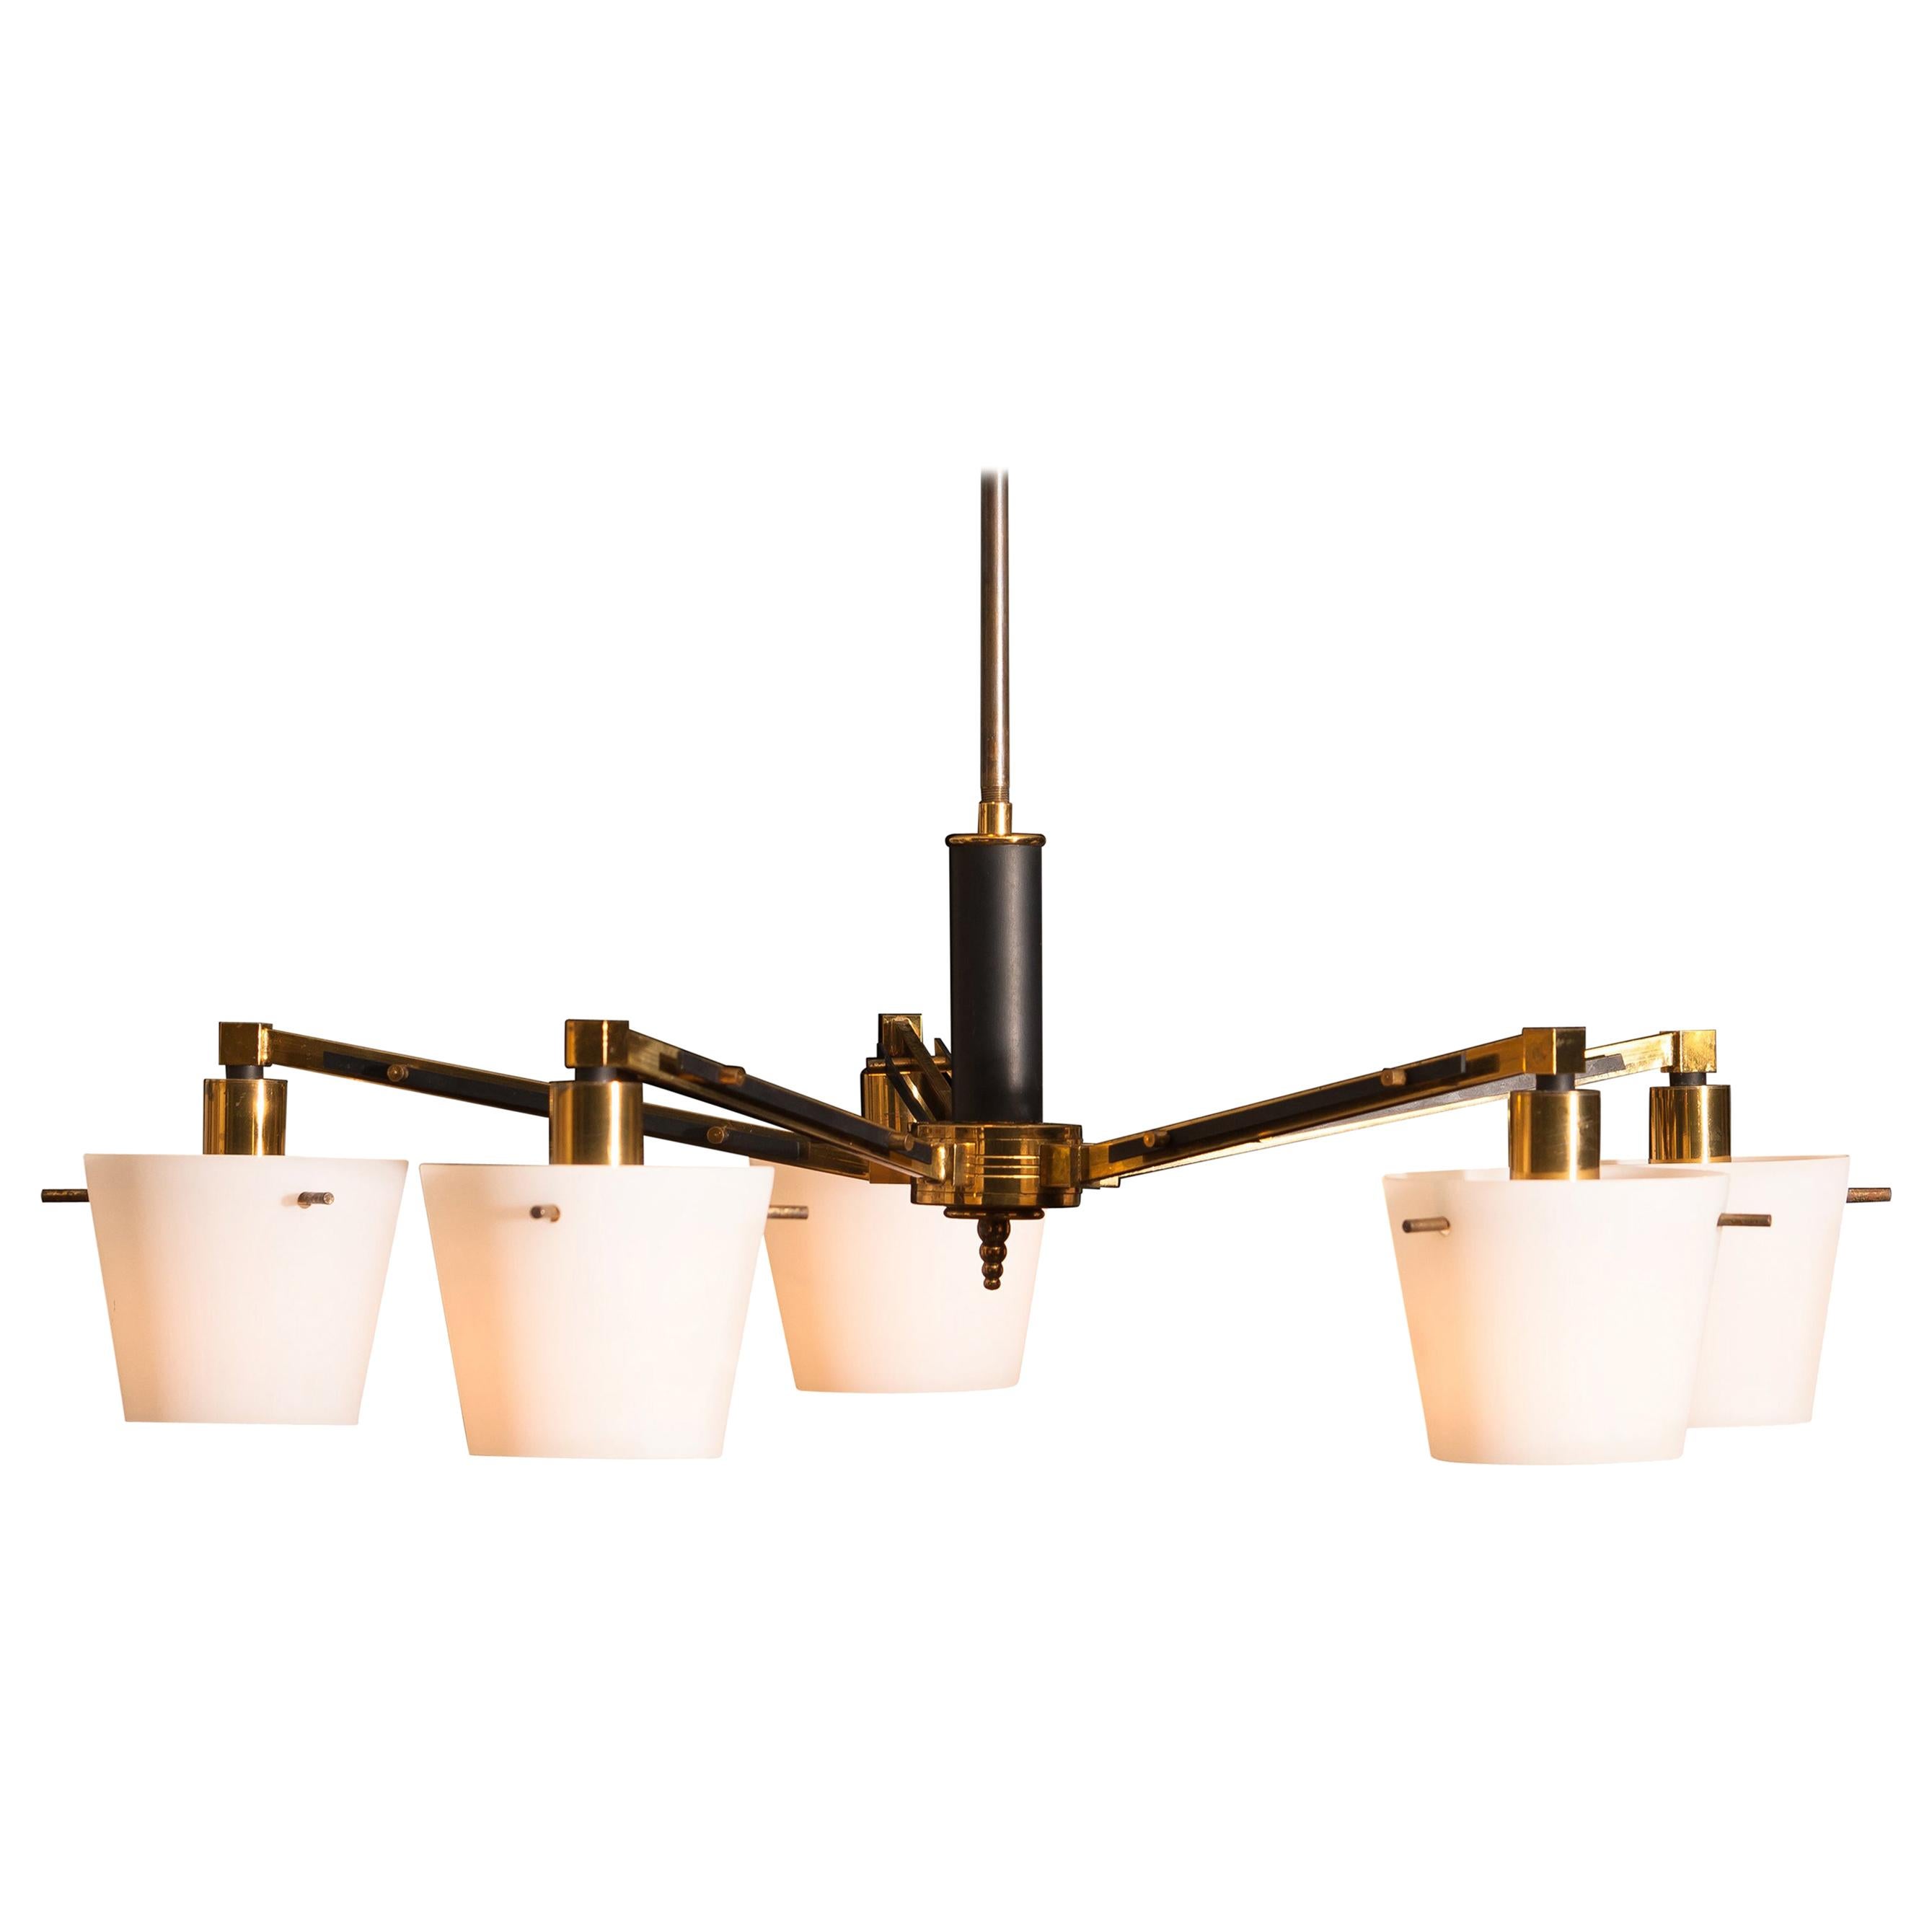 Mid-Century Modern 1950s, Italian Brass Chandelier / Pendant with Frosted with Glass Shades